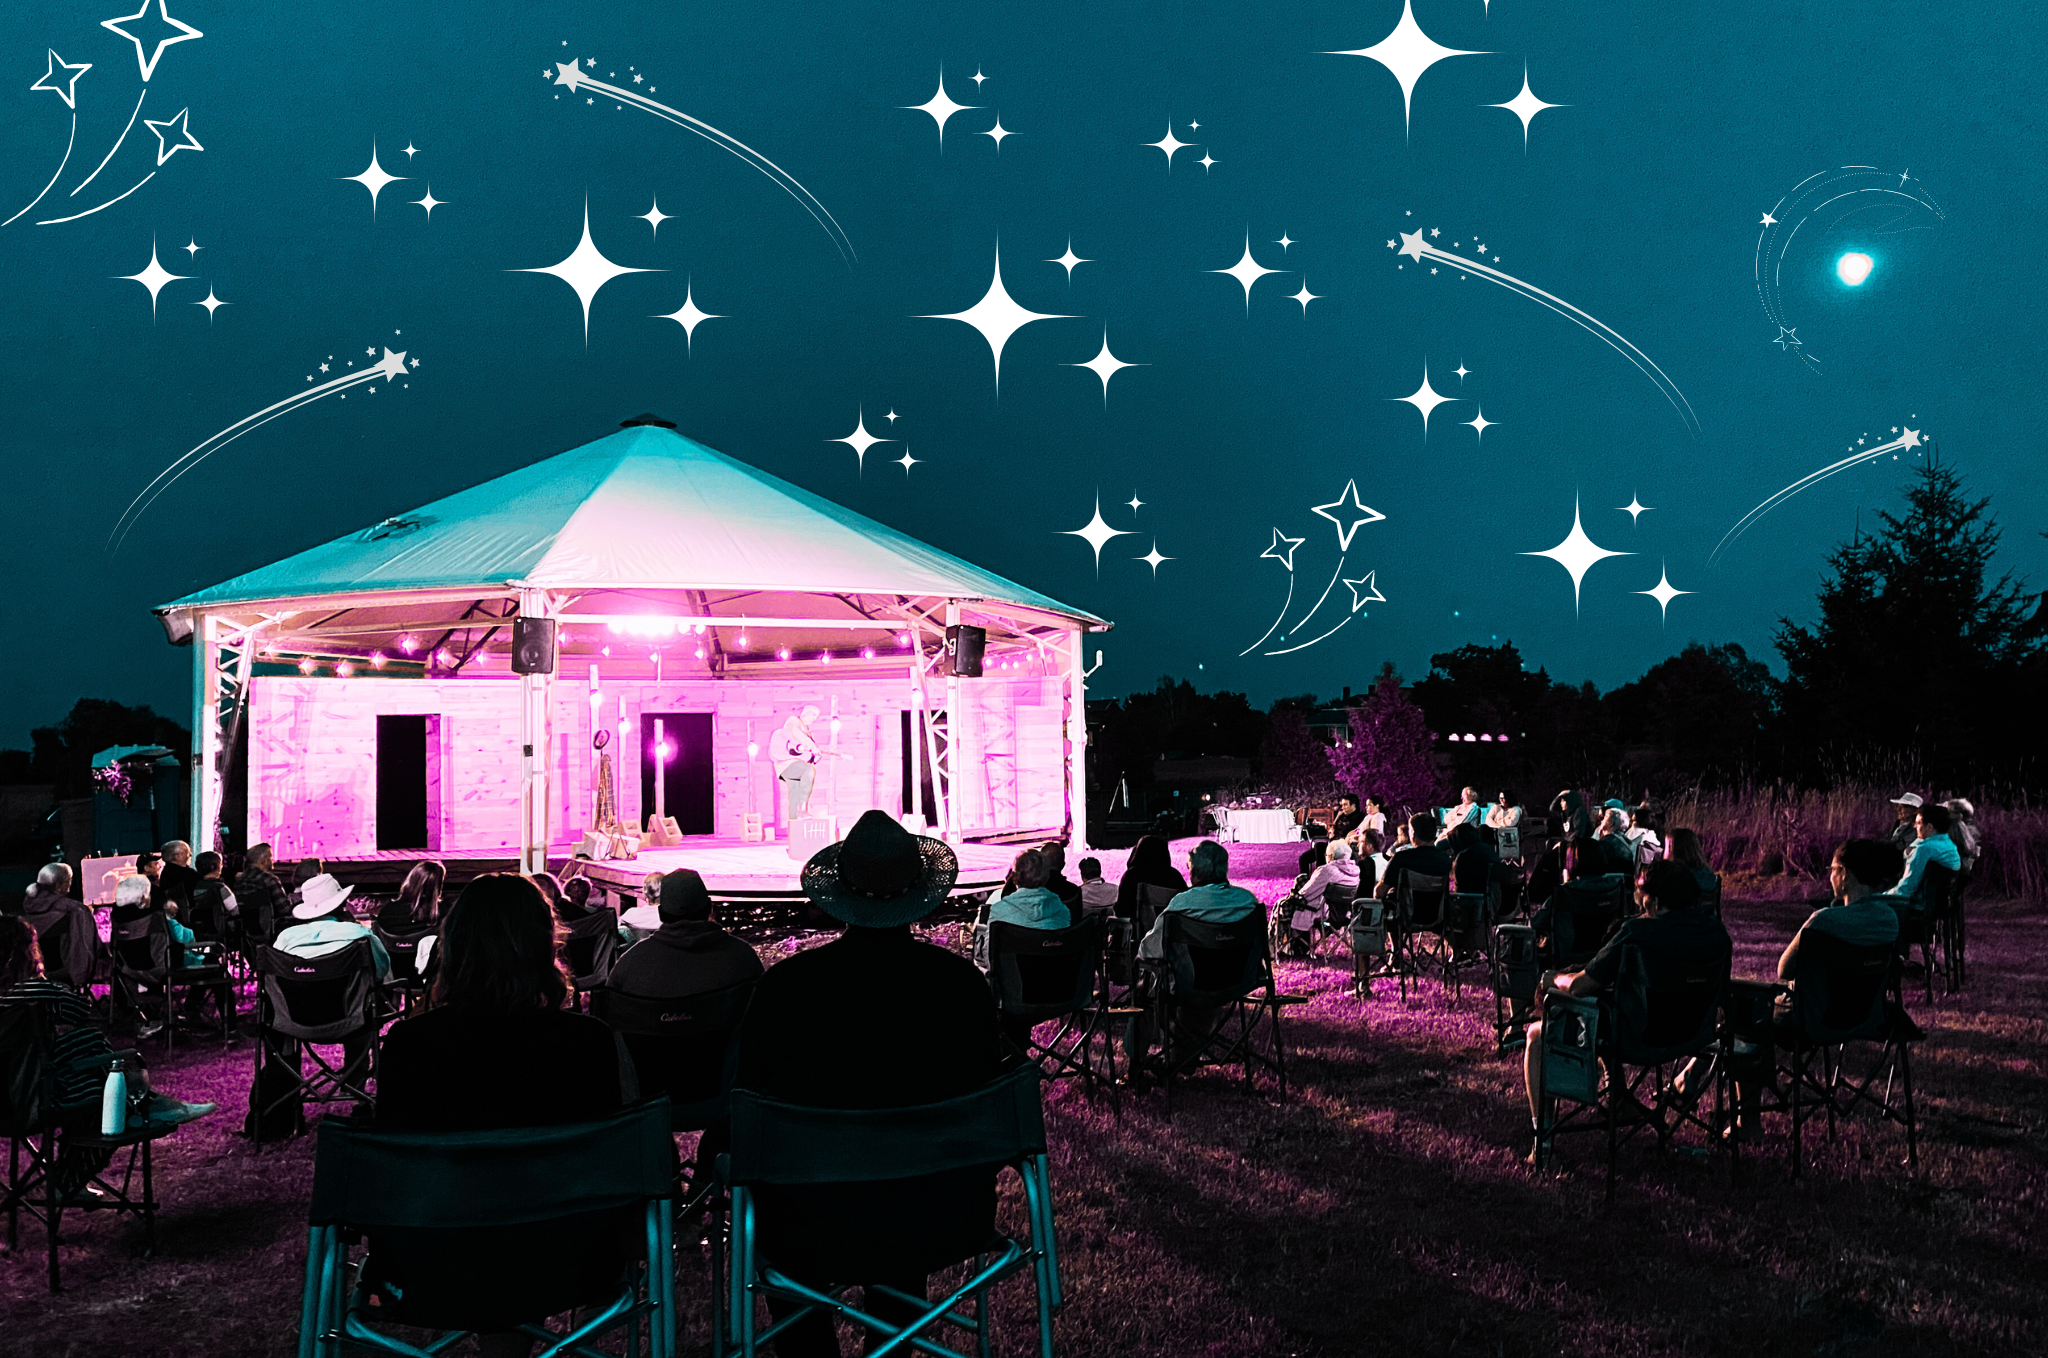 an audience sits in front of the eddie pavilion, taking in a show under a night sky. The image's colours have been altered -- the sky is a dark, tealy blue, and the pavilion glows pink in the night.